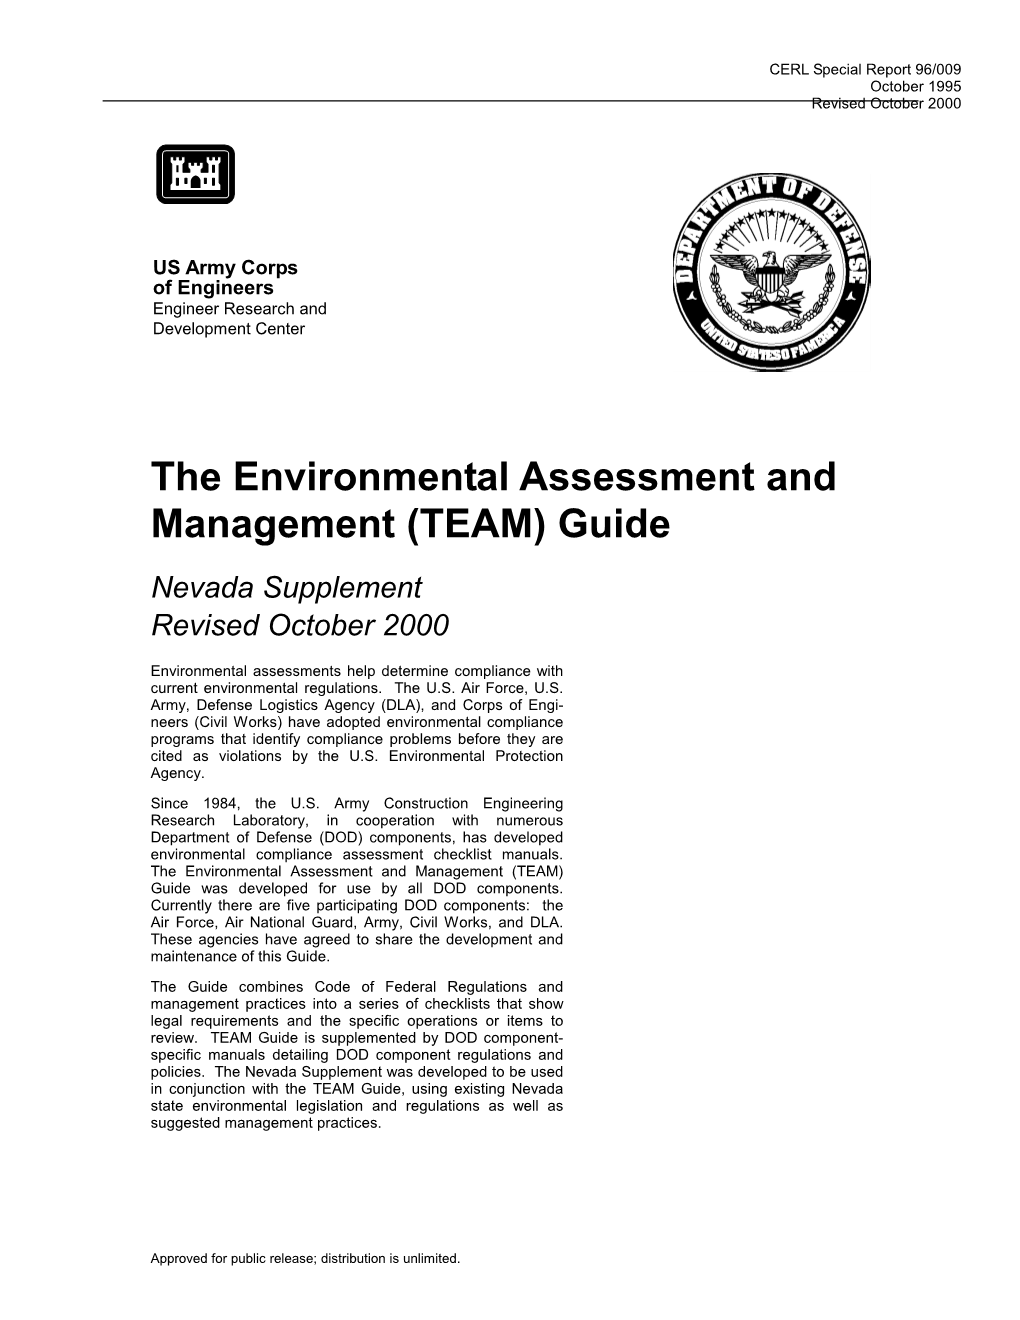 Nevada Supplement Revised October 2000